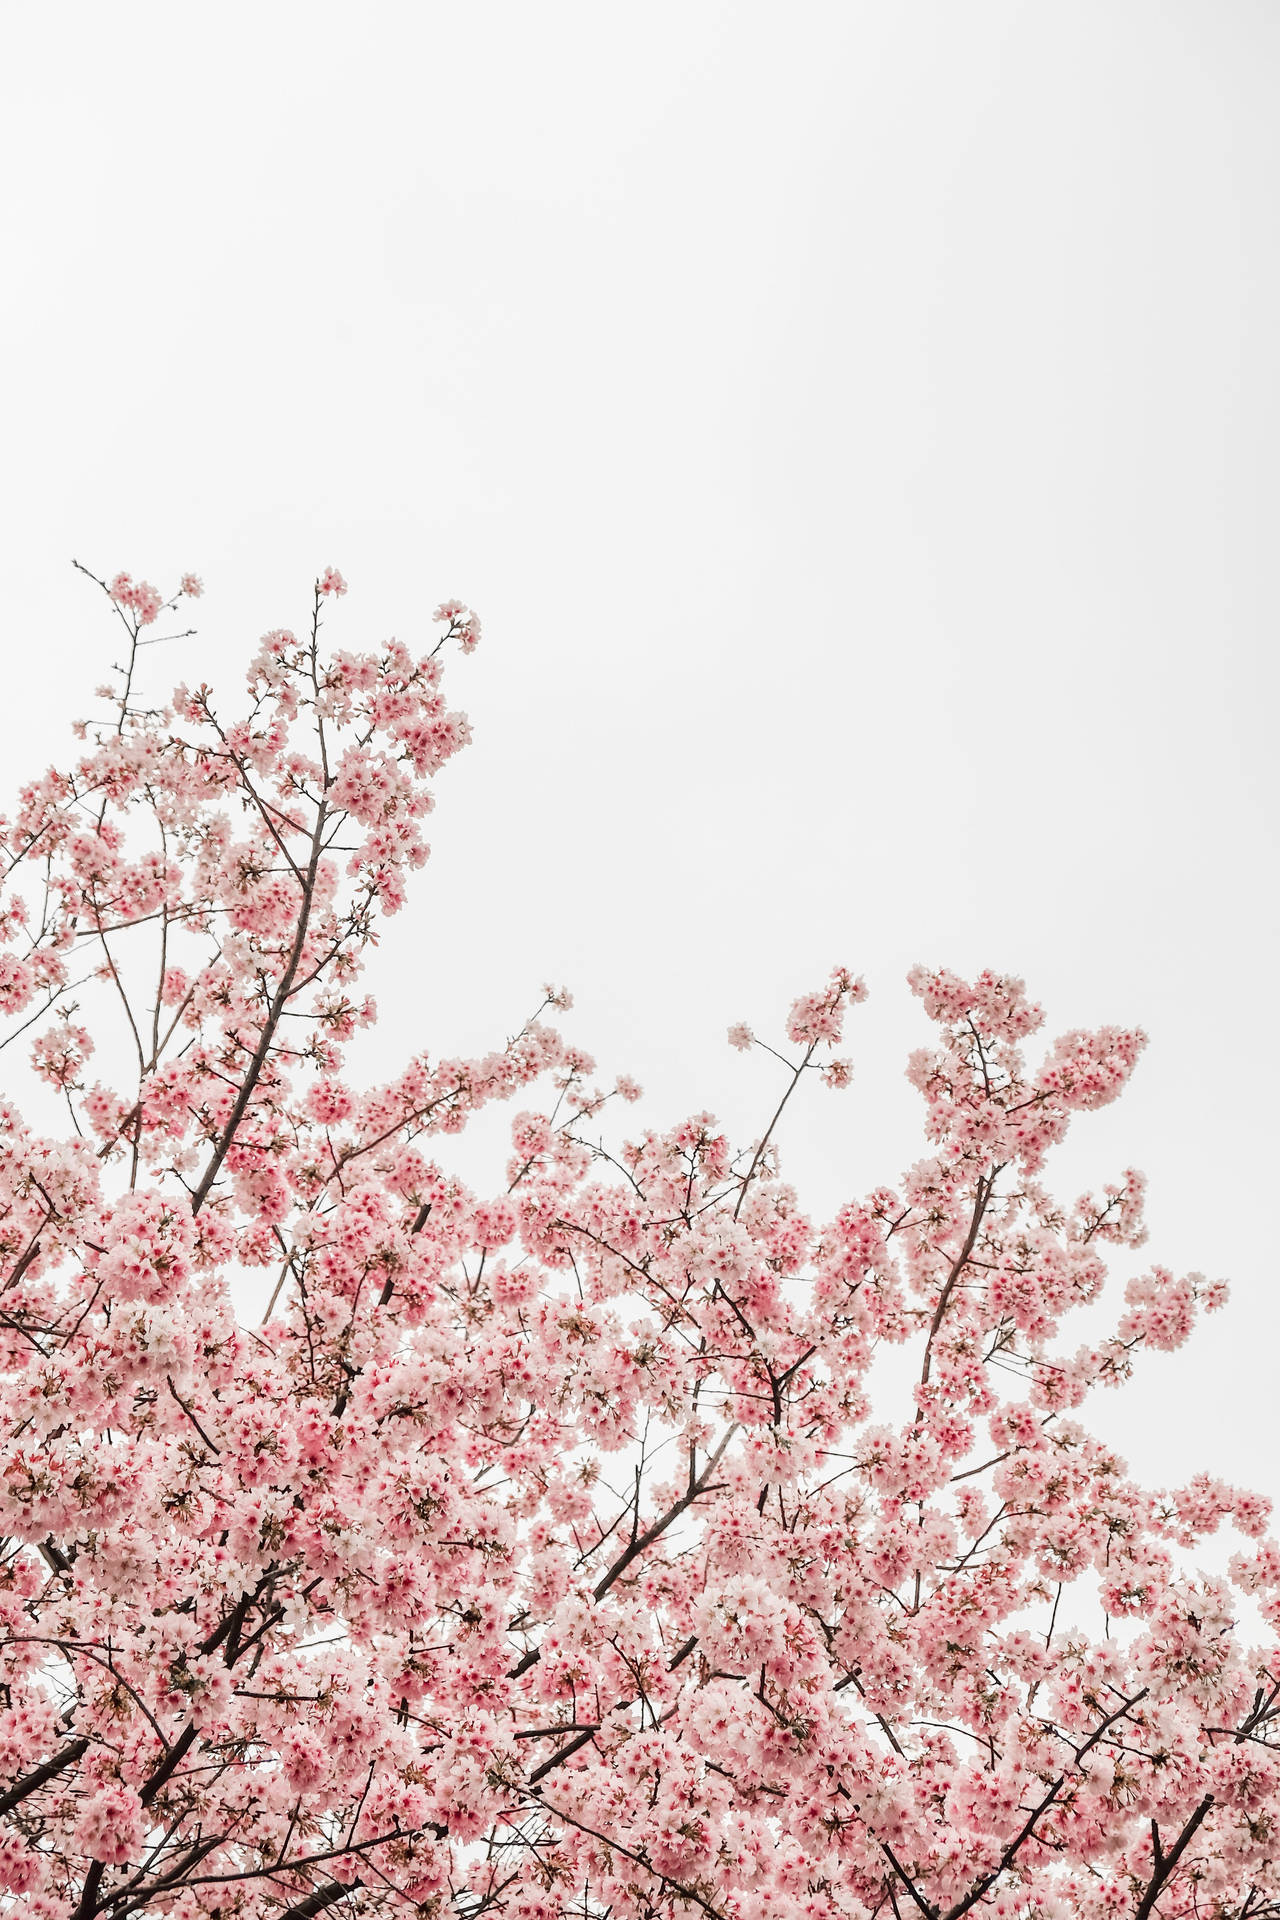 Spring season wallpaper Resolution 1280x1920 | Best Download this awesome wallpaper - Cool Wallpaper HD - CoolWallpaper-HD.com